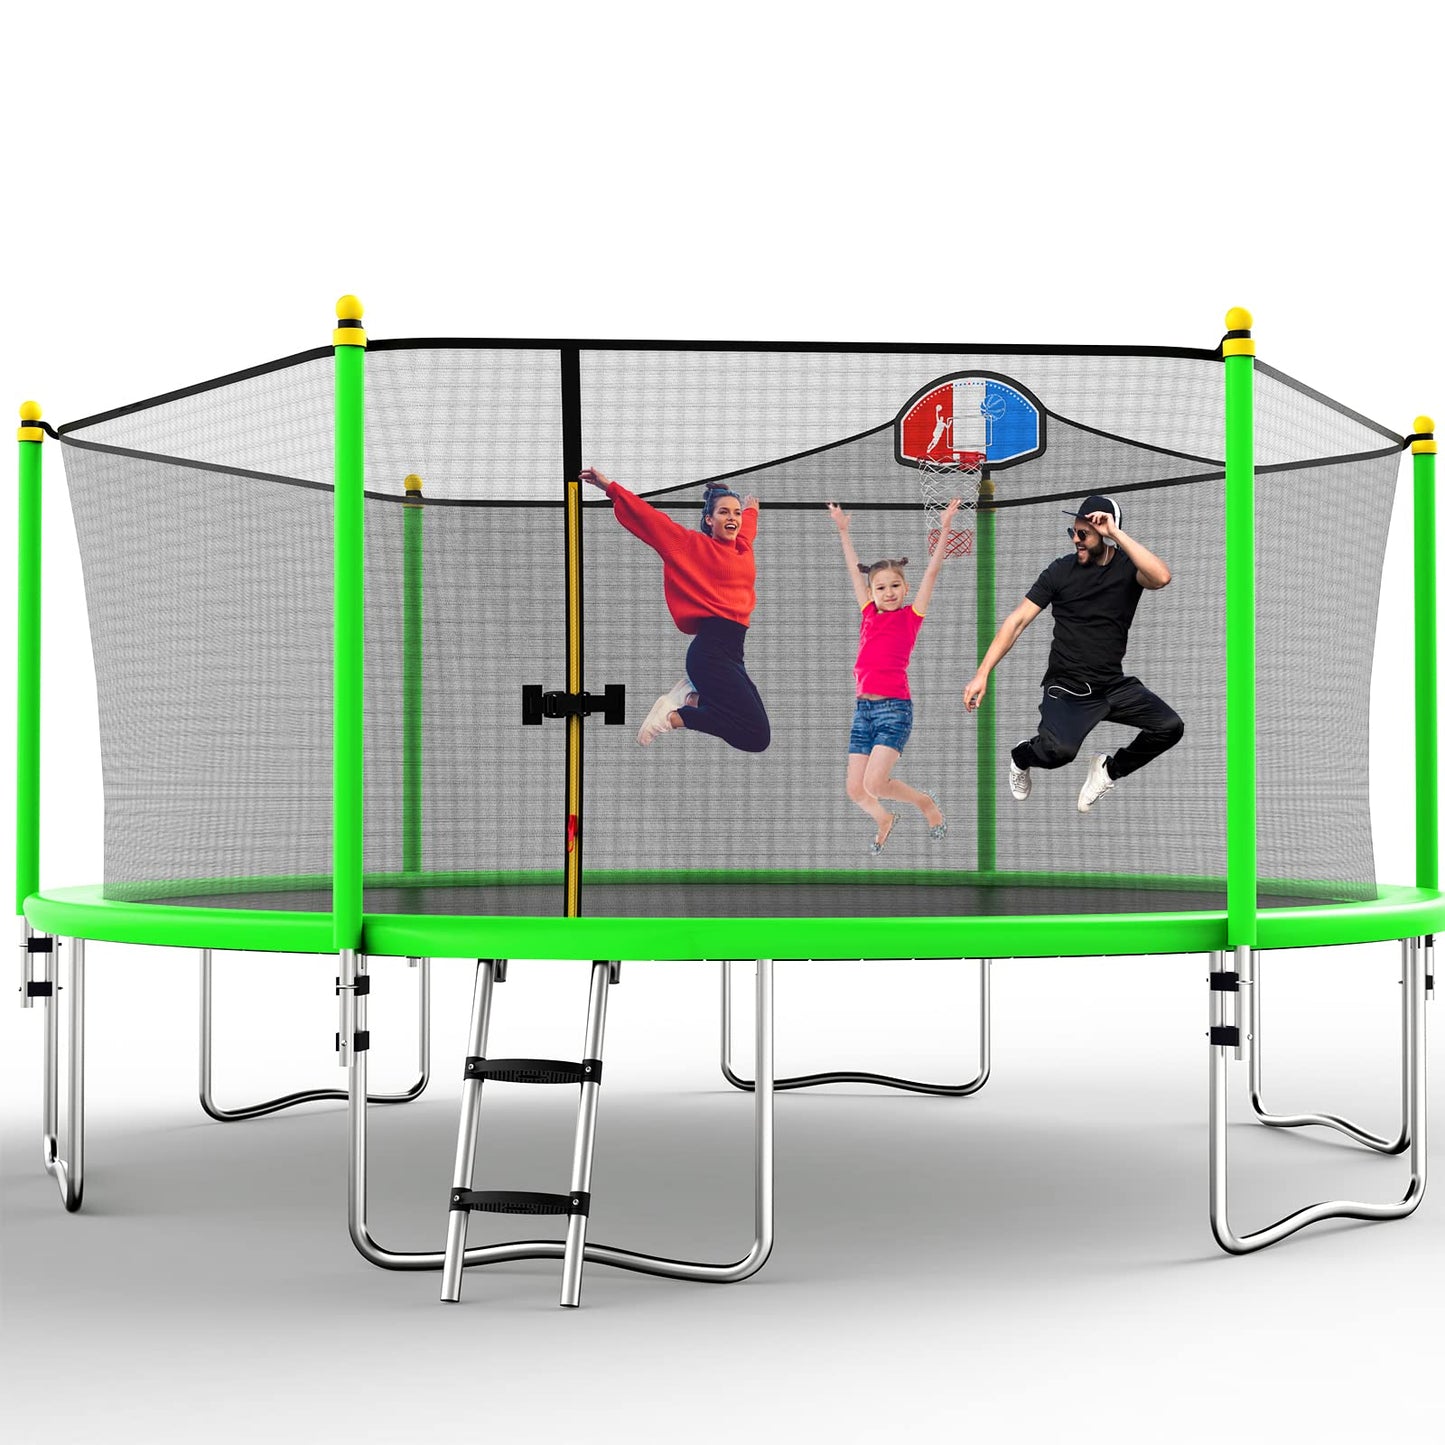 16FT Outdoor Backyard Jumping Trampoline with Basketball Hoop and Ladder